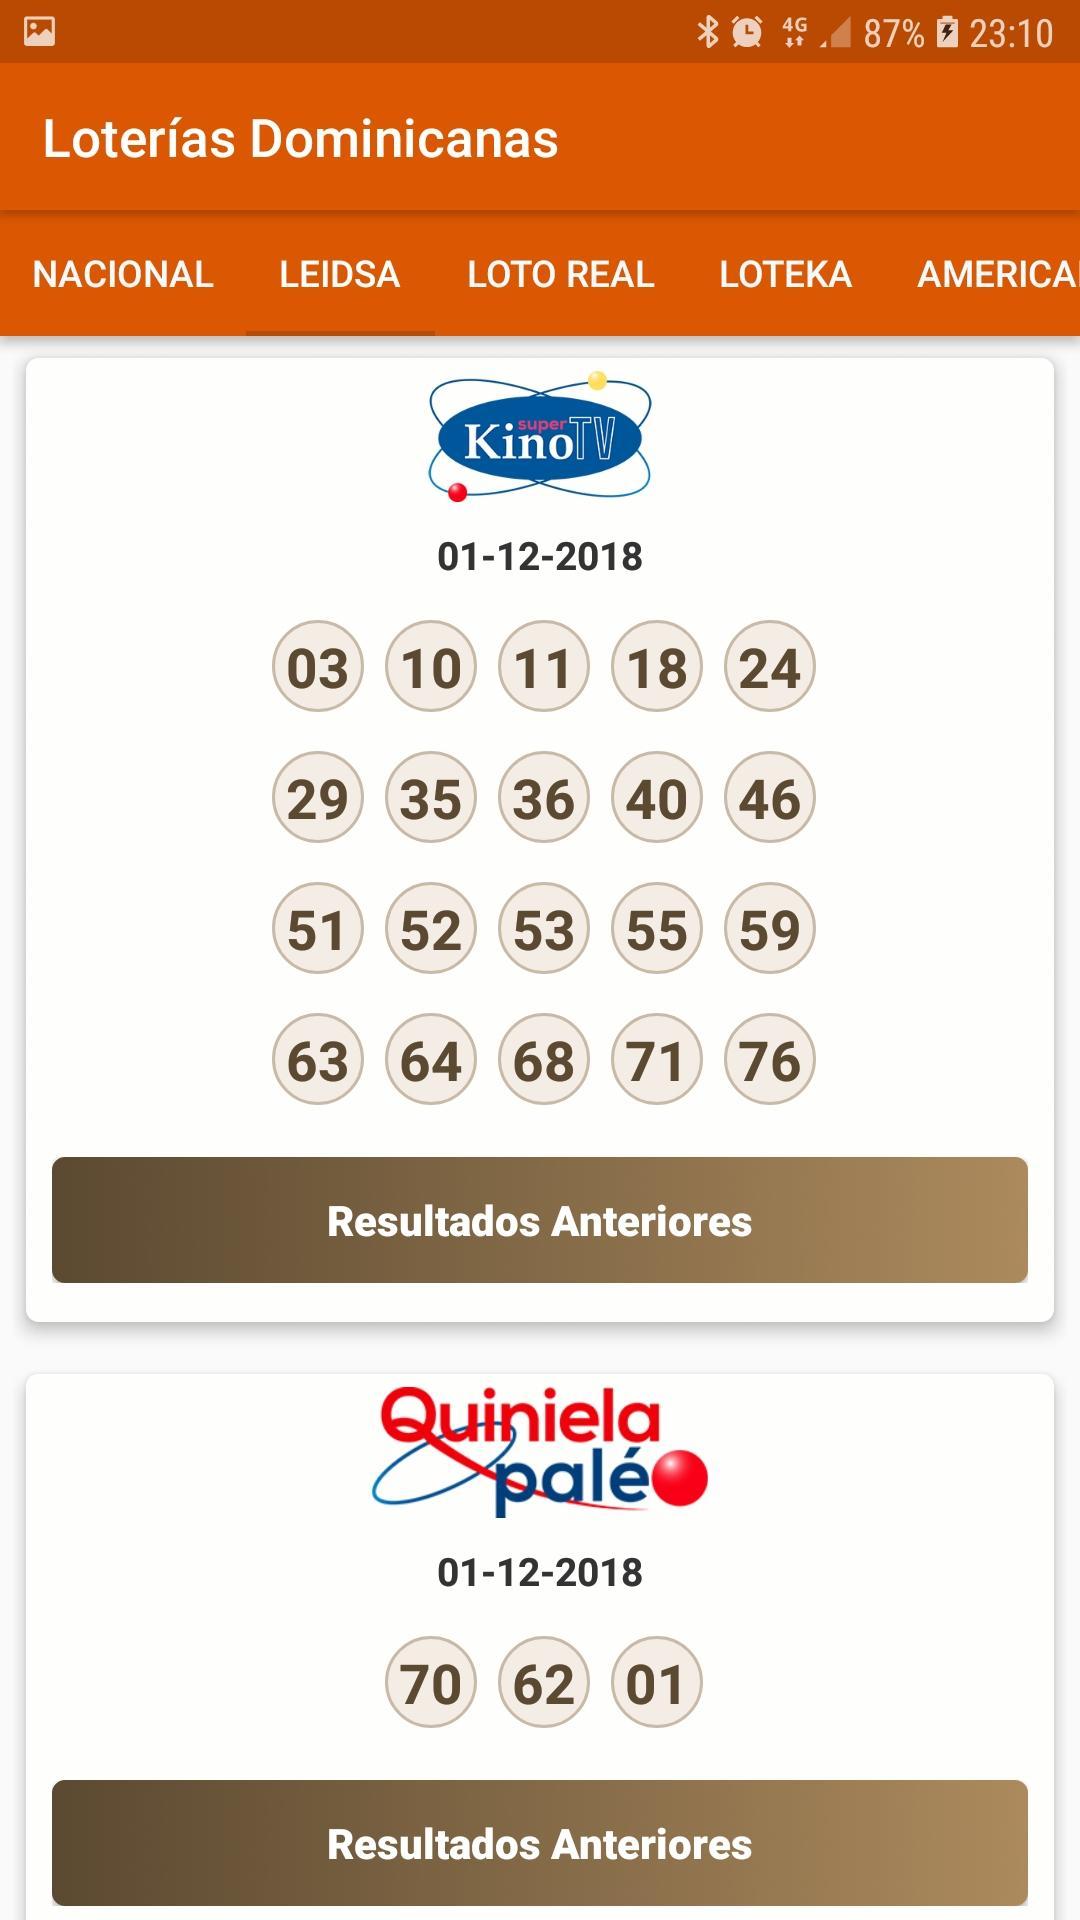 Dominican Lottery